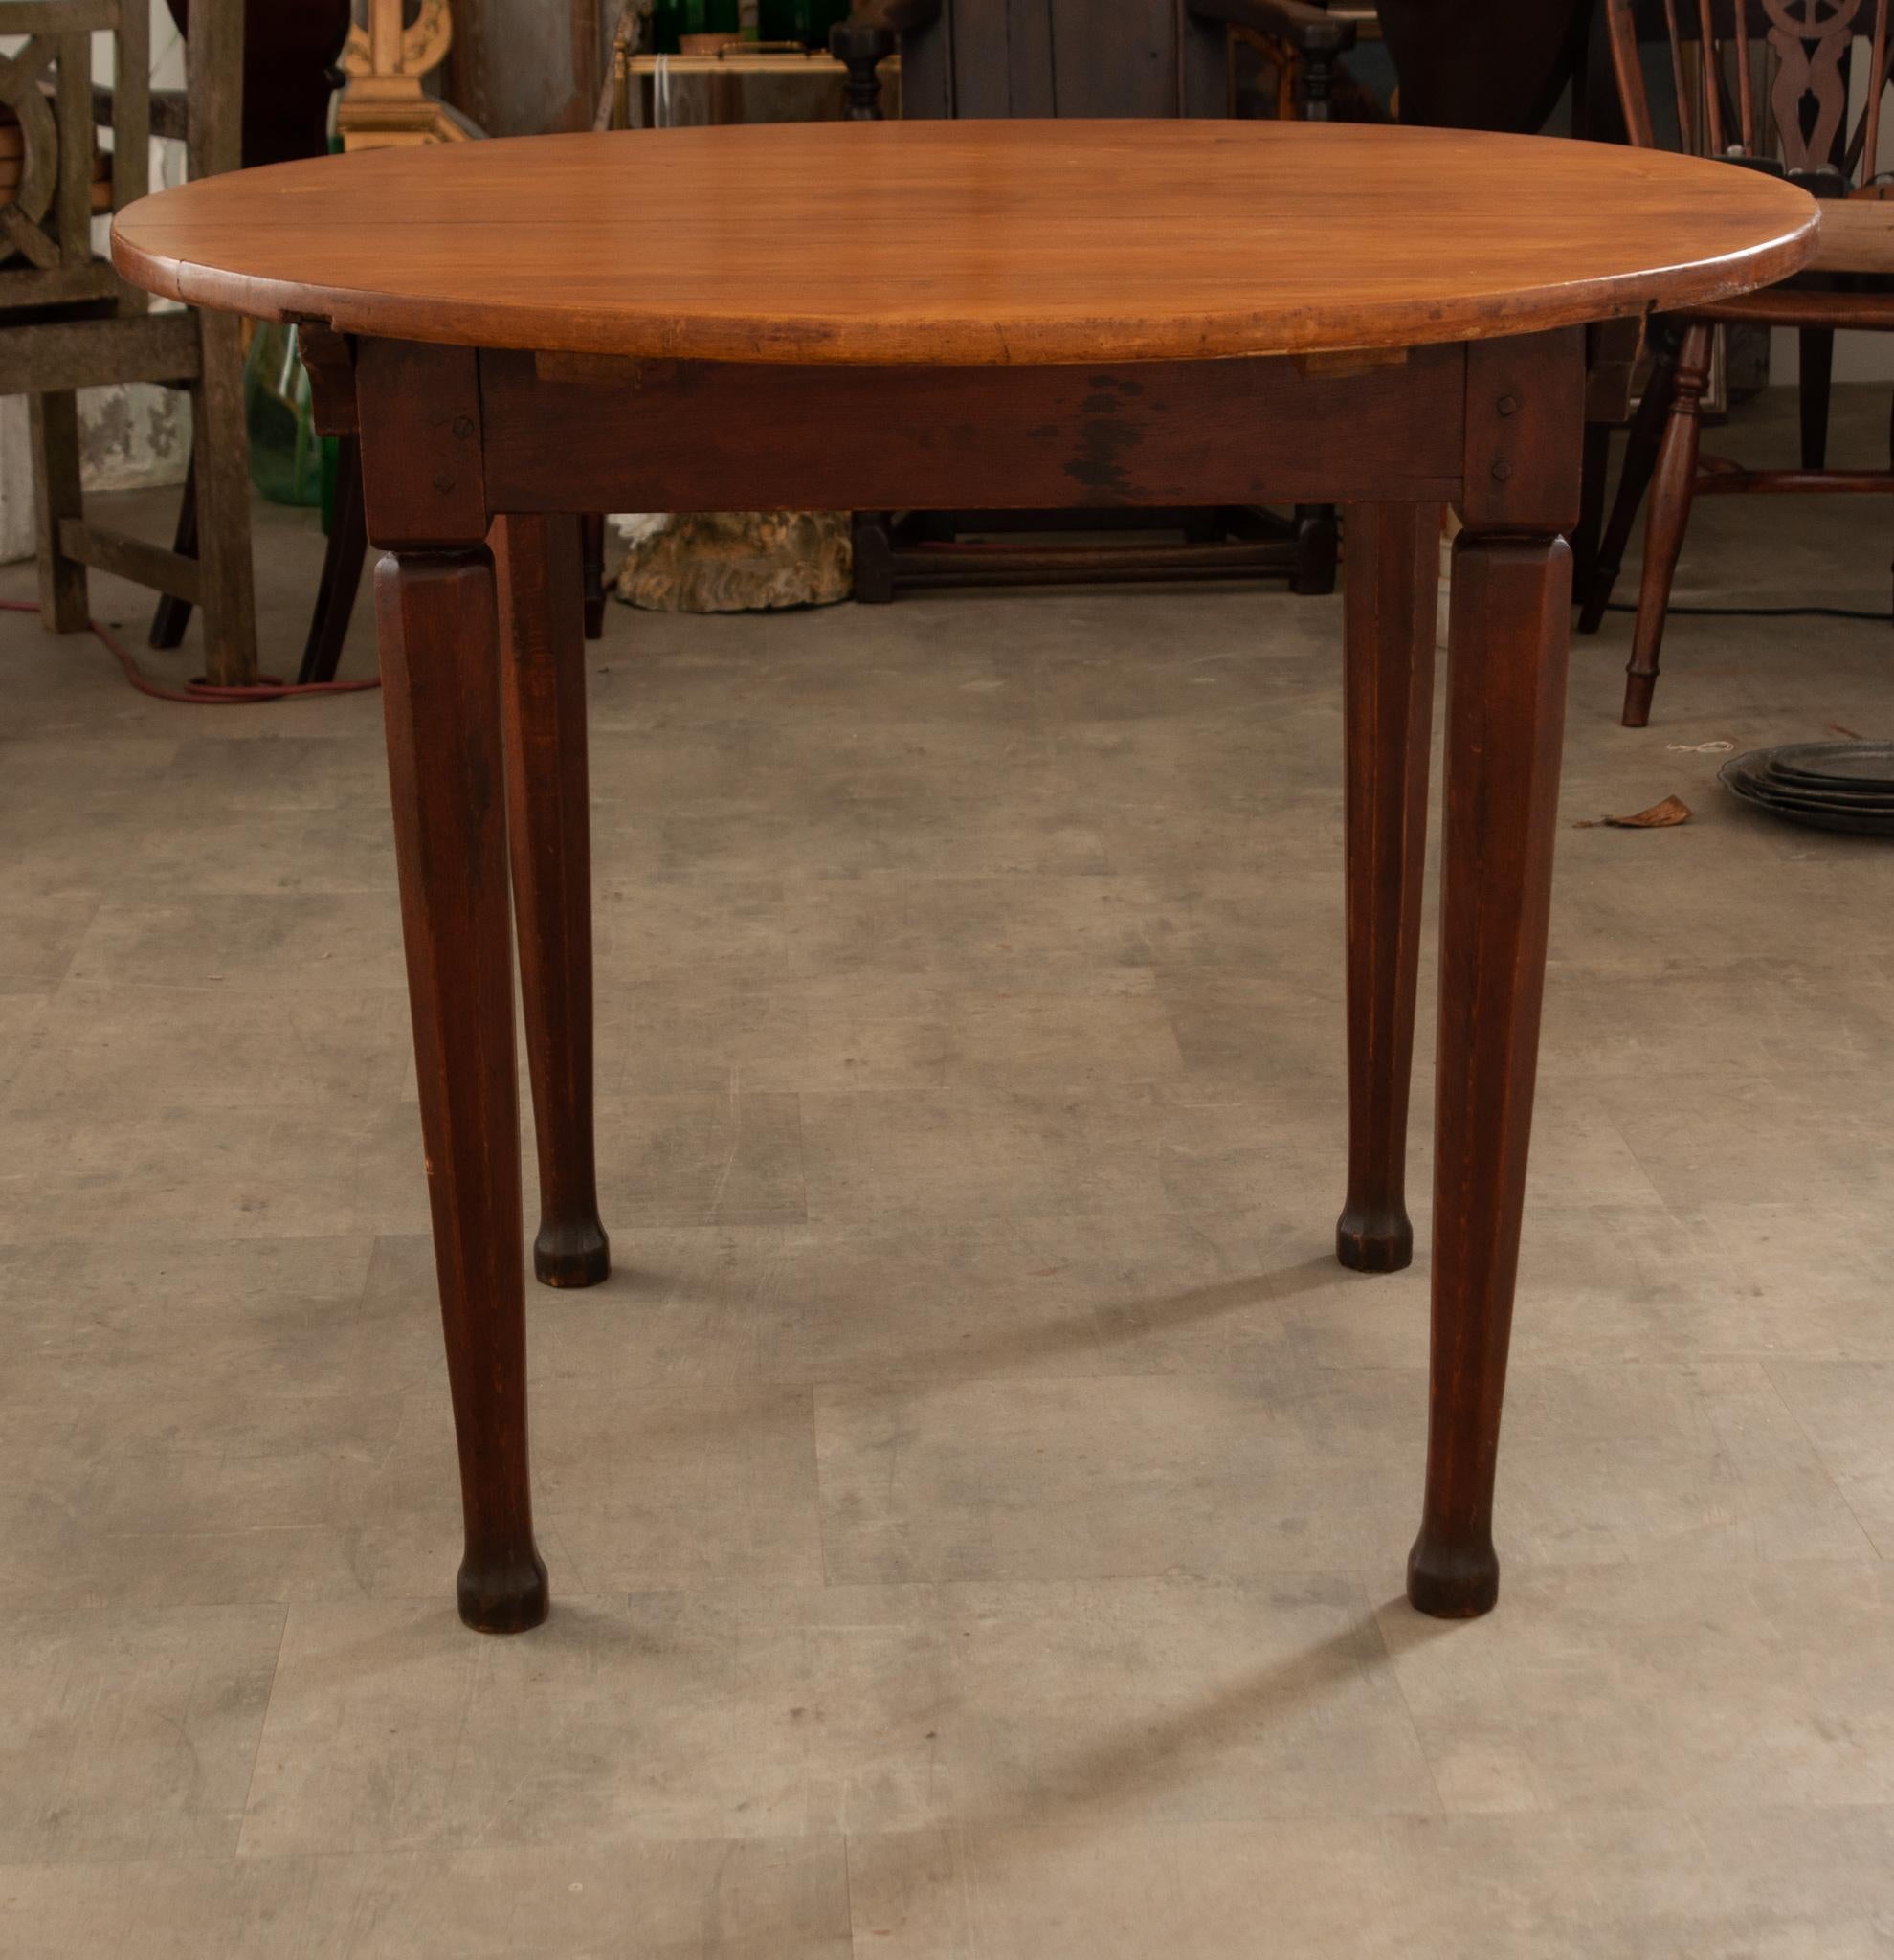 A wonderful small table with a lightly toned fruitwood top from 19th Century France. This smaller table could be used as a dining or breakfast room table for two. It could also be used as a side or occasional table next to a chair or sofa.  It has a